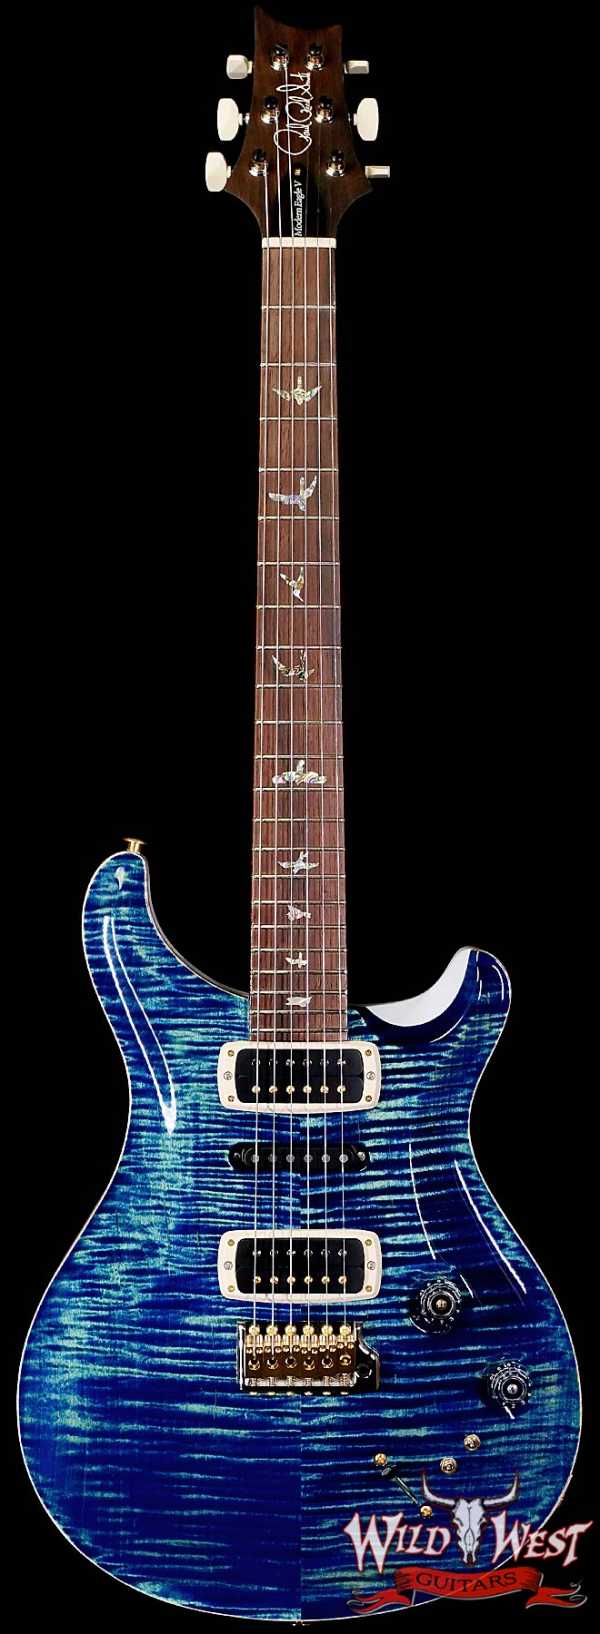 Paul Reed Smith PRS Wood Library 10 Top Modern Eagle V ME5 Flame Maple Neck Brazilian Rosewood Fingerboard River Blue 8.75 LBS (US Only / No International Shipping)